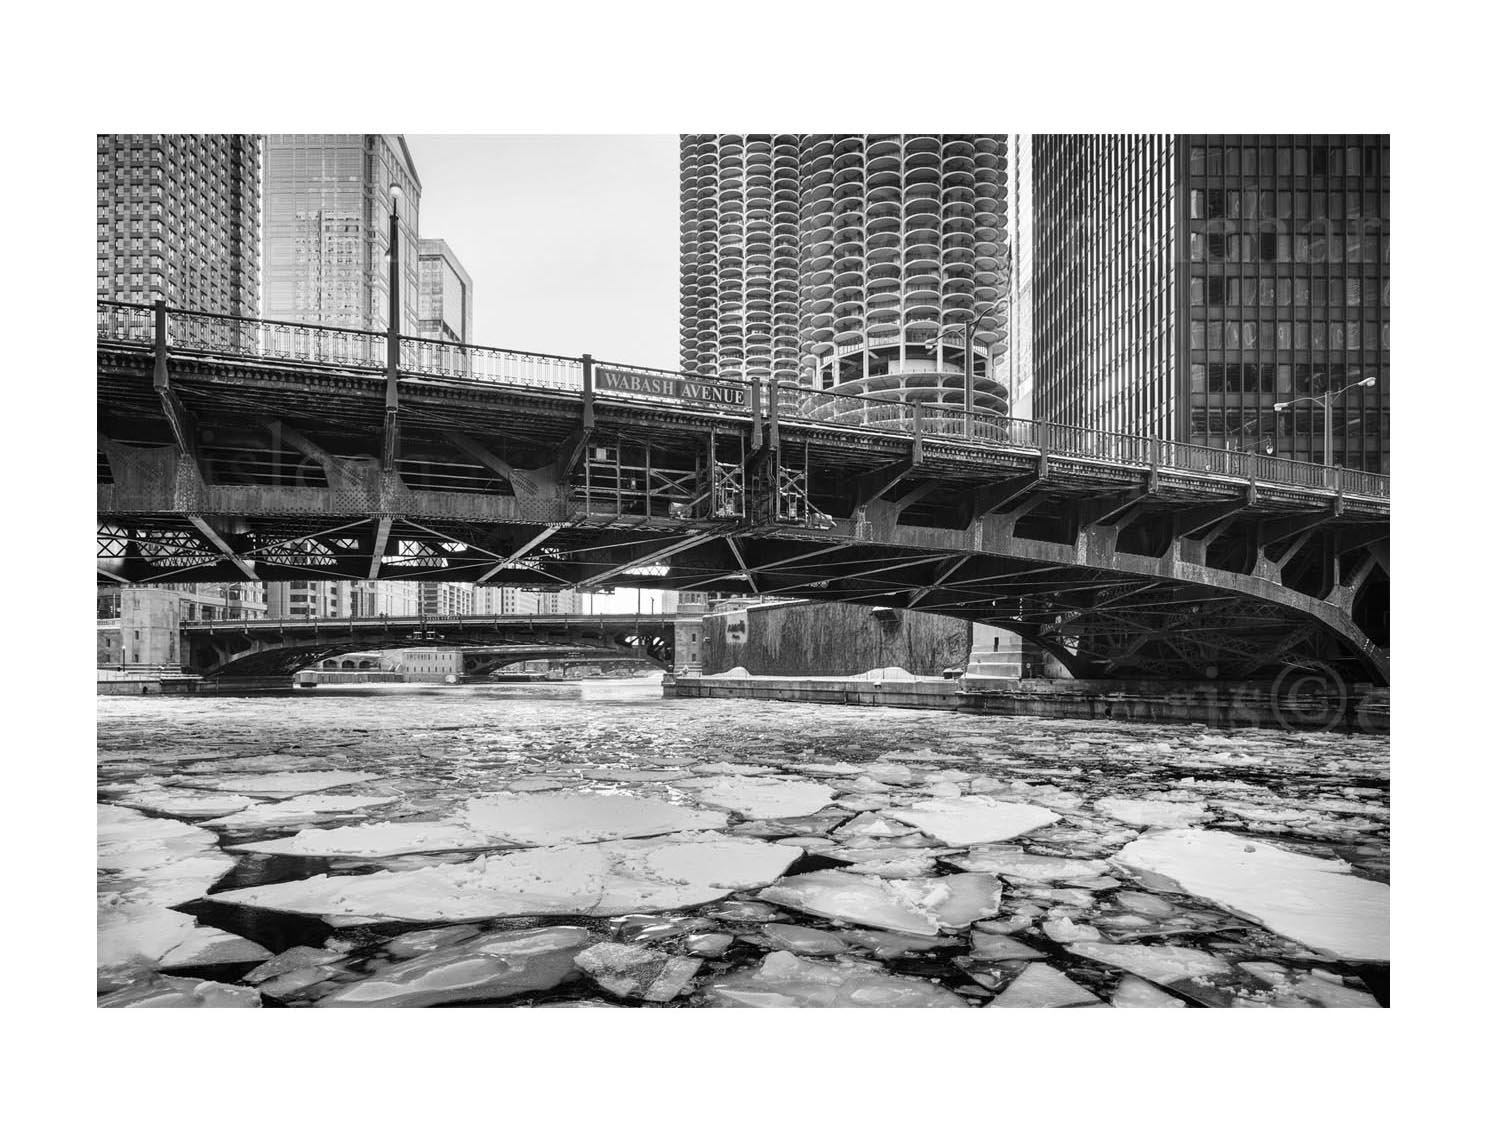 Wabash Avenue at the Chicago River, 2014